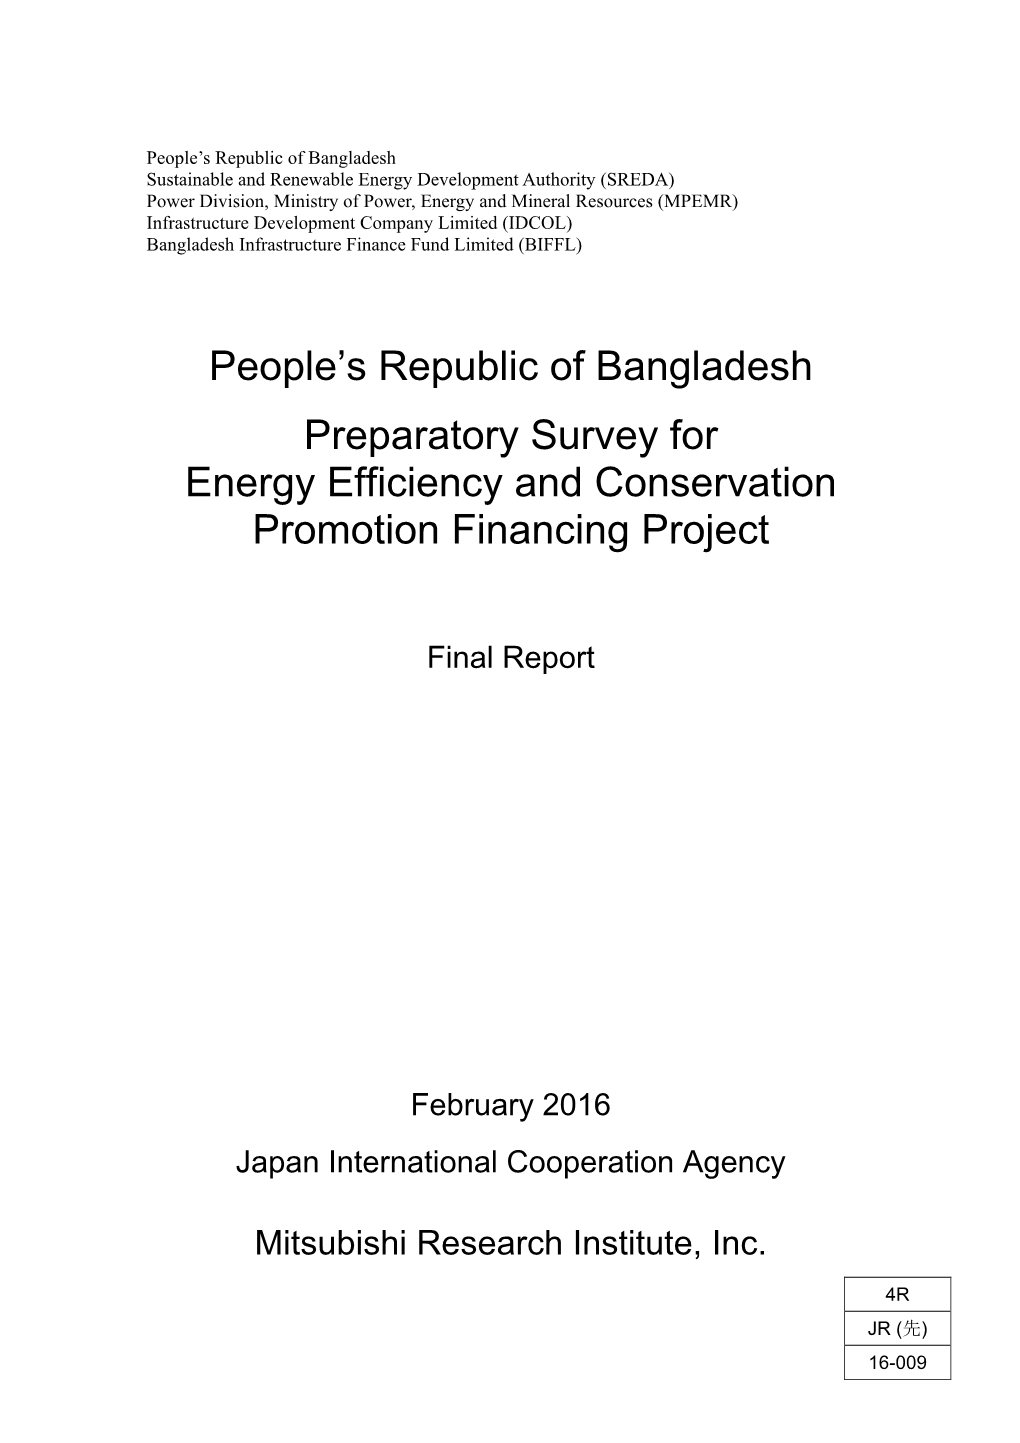 Preparatory Survey for Energy Efficiency and Conservation Promotion Financing Project